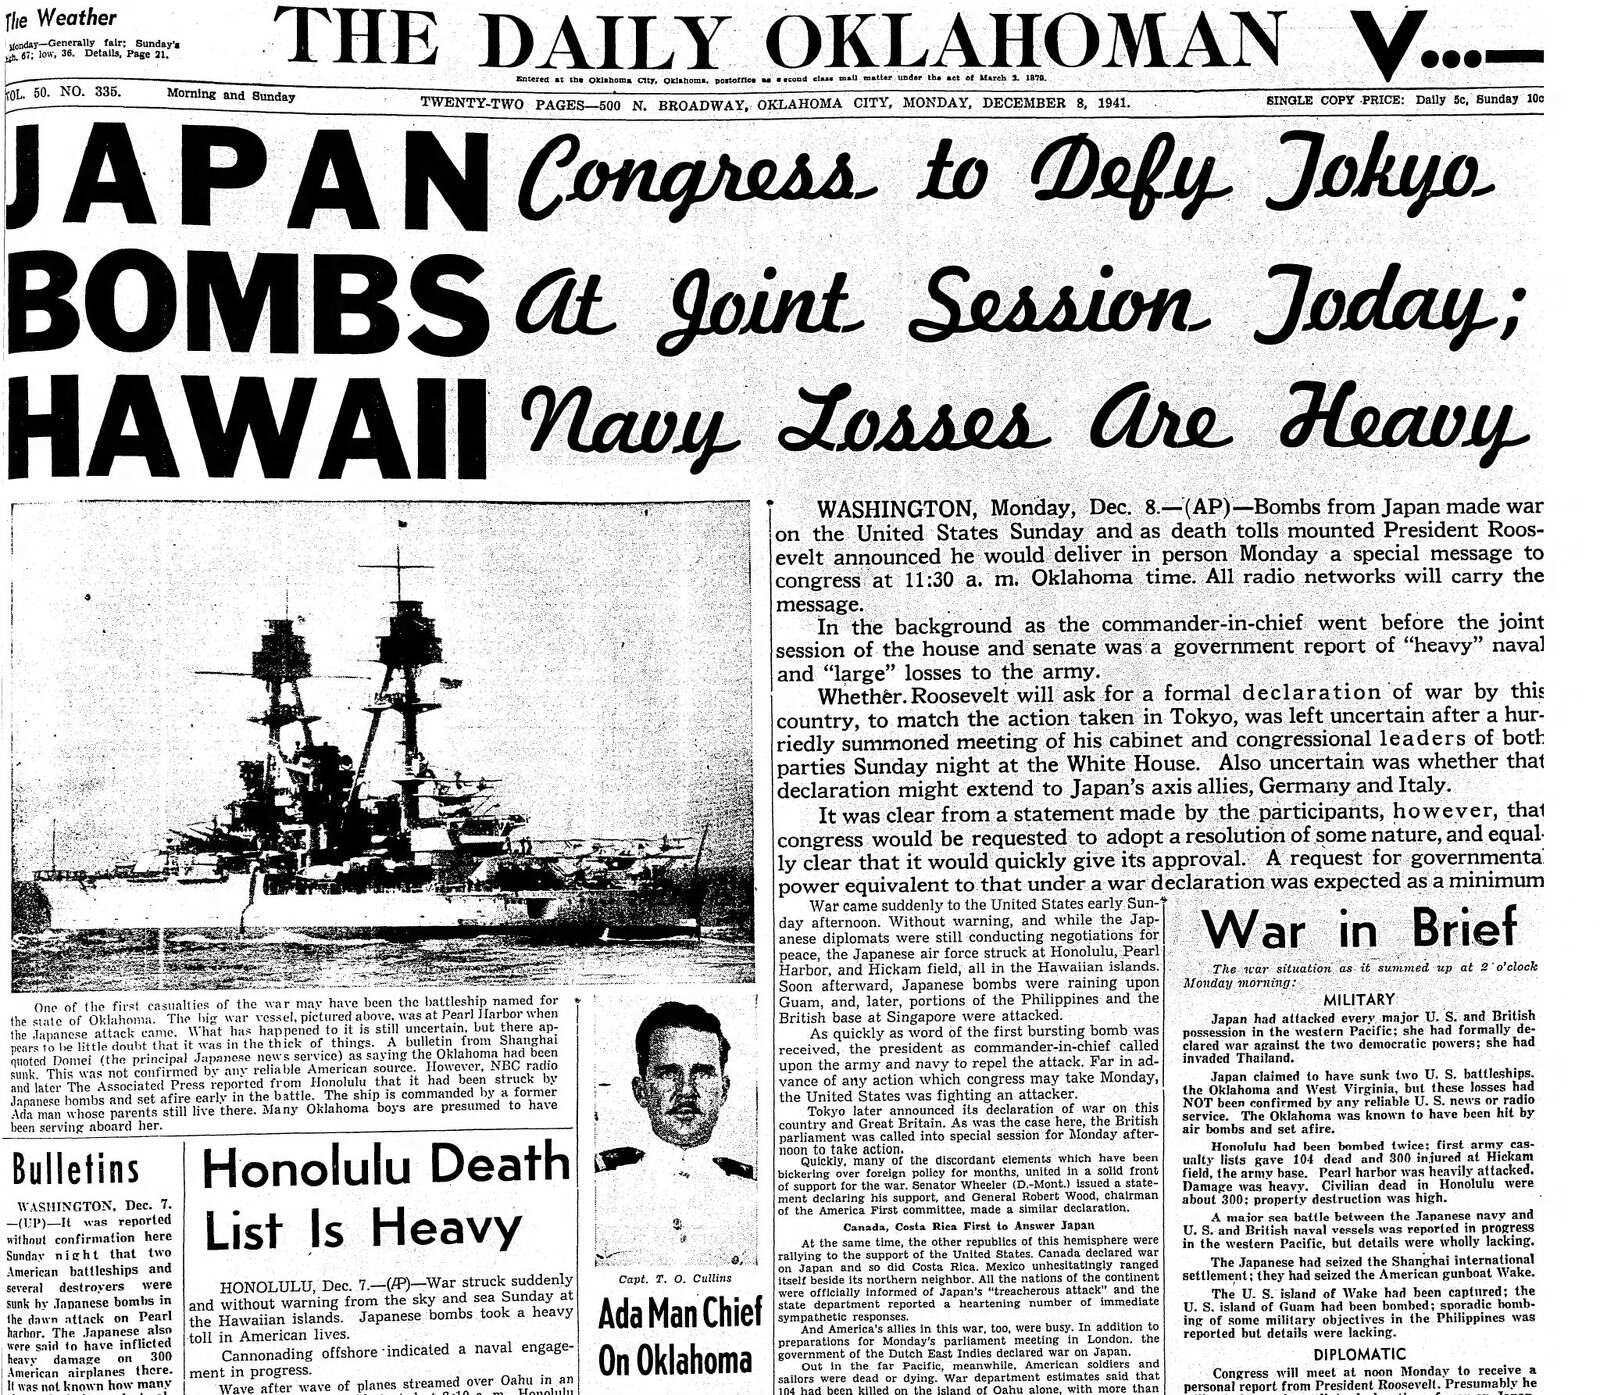 The front page from The Daily Oklahoman, Oklahoma City, Oklahoma, on December 8, 1941.